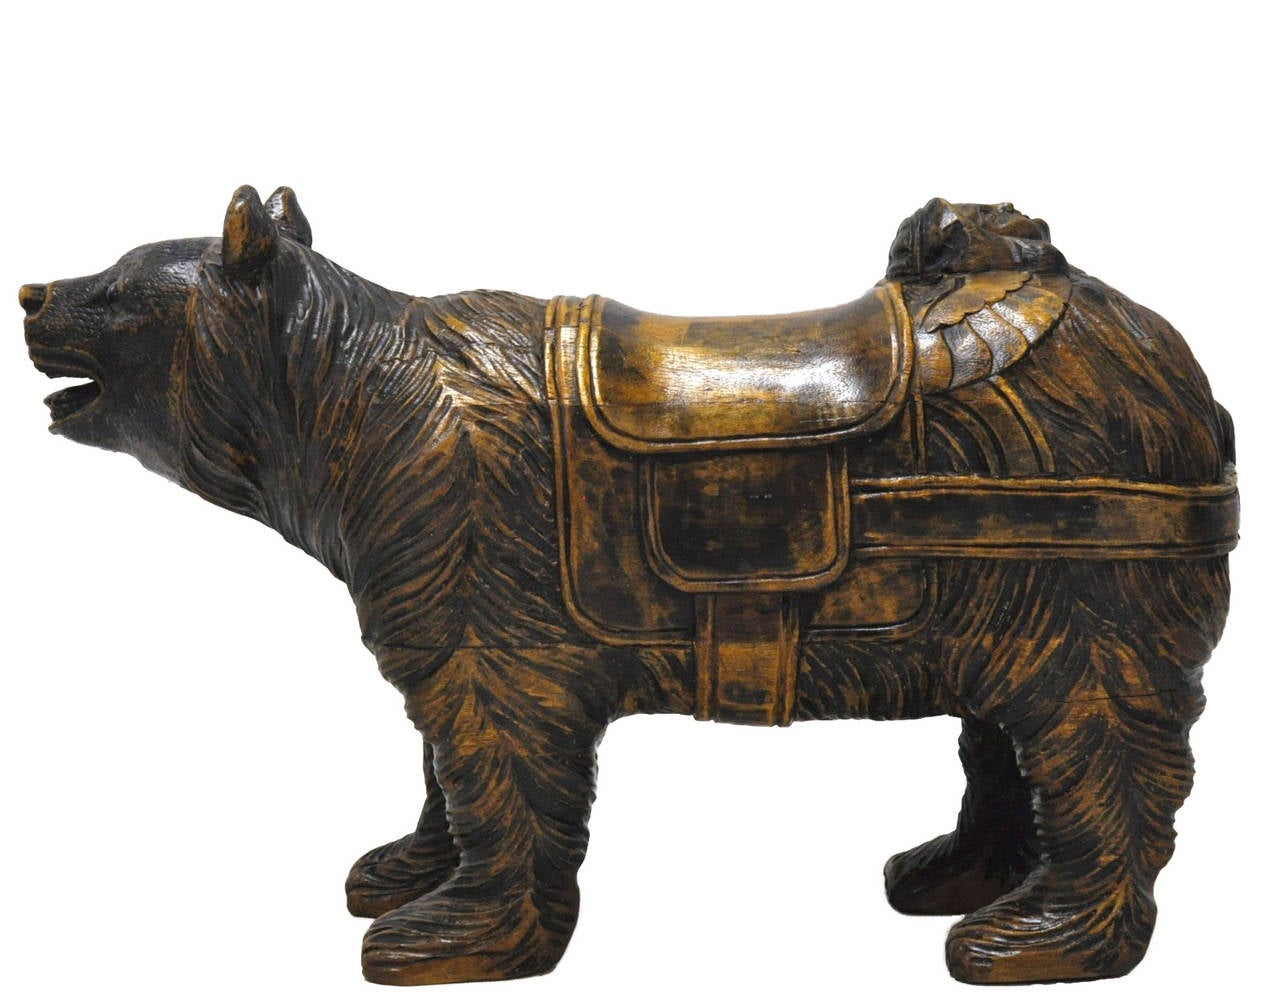 19th century Black Forest wooden bear sculpture with glass eyes, circa 1900.